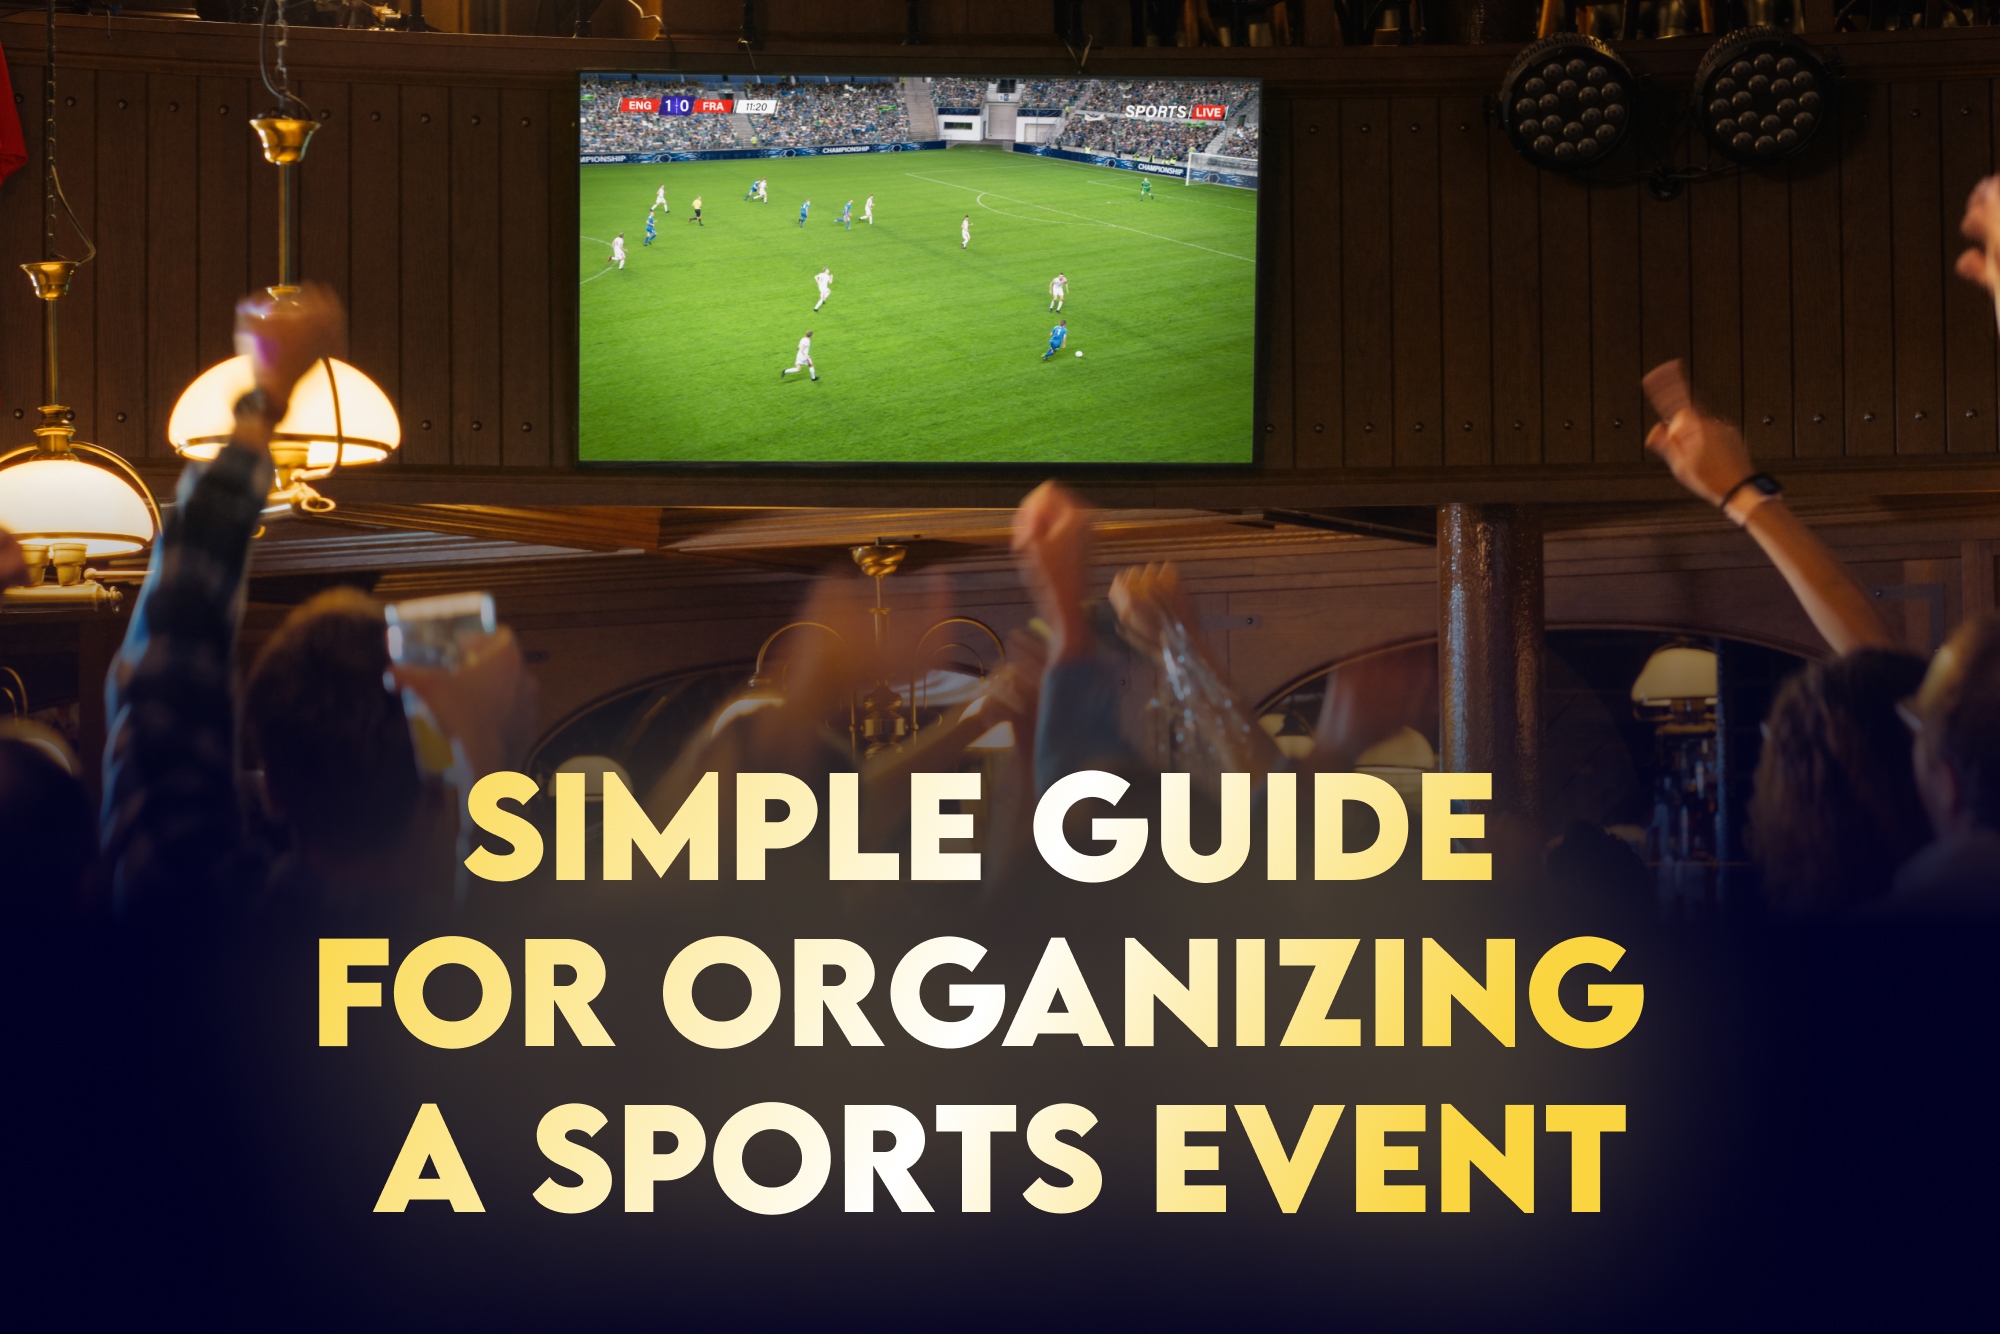 A Simple Guide for Organizing a Sports Event